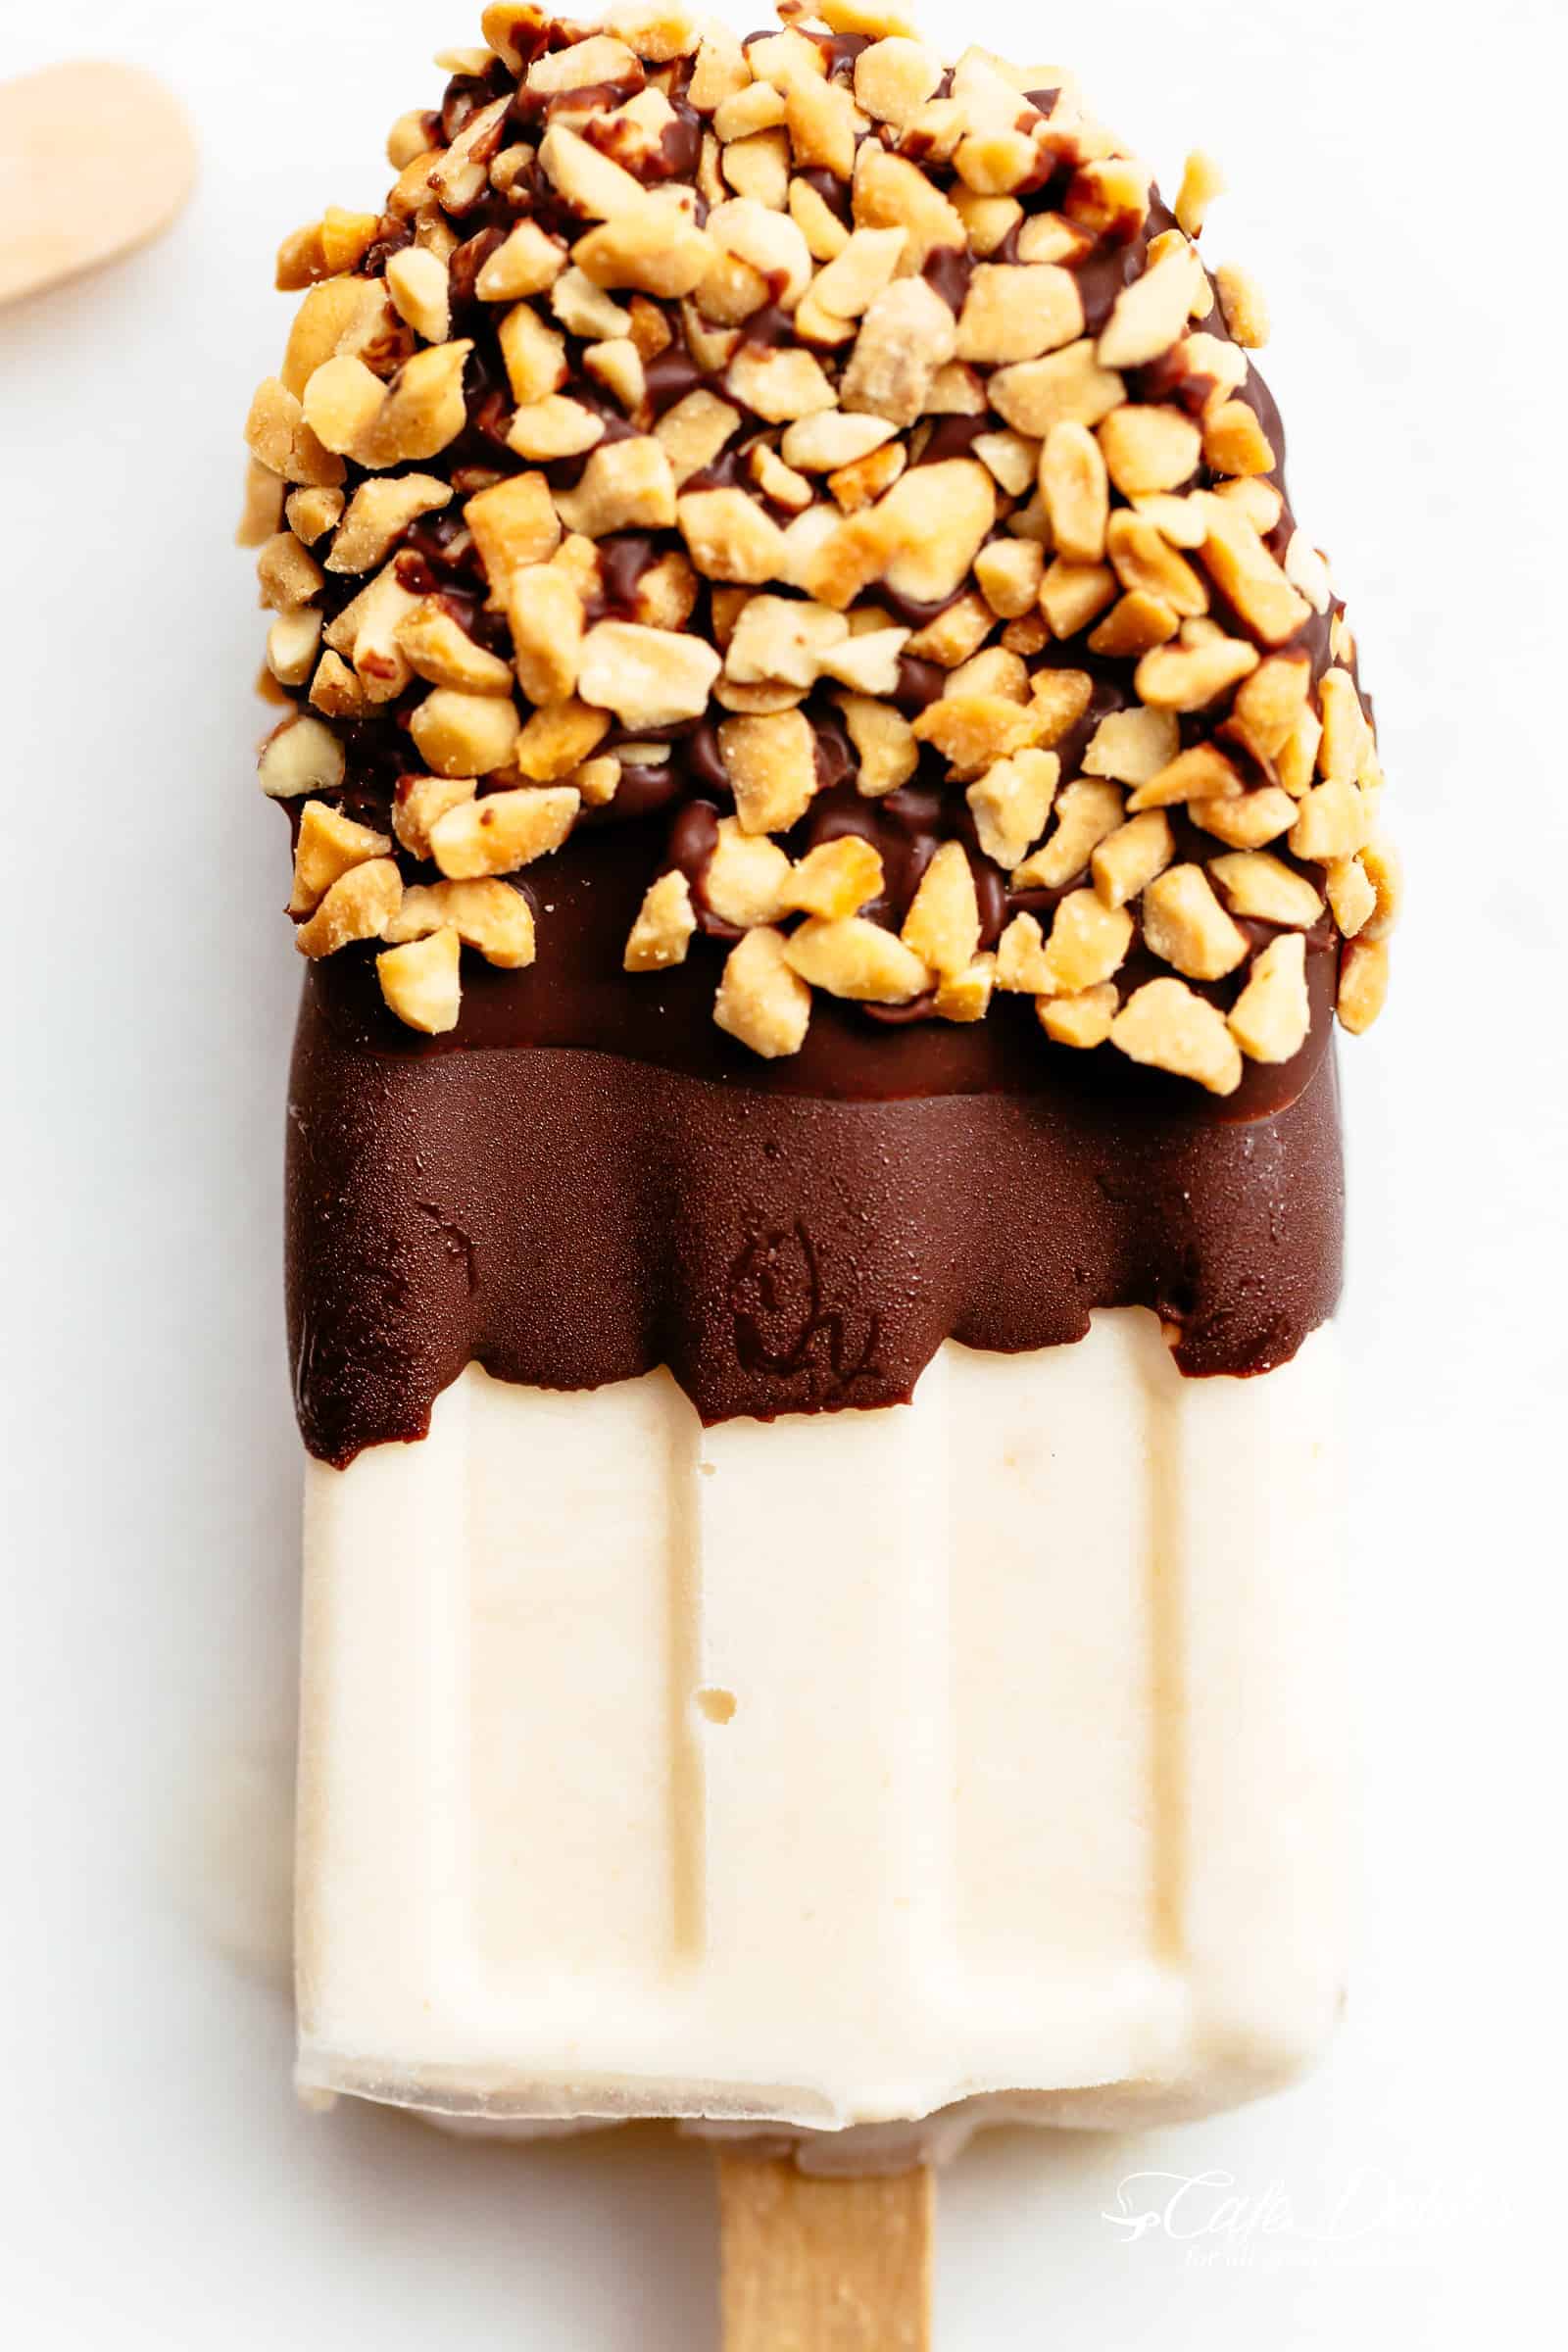 Chocolate dipped Banana Popsicles with crushed nuts | cafedelites.com